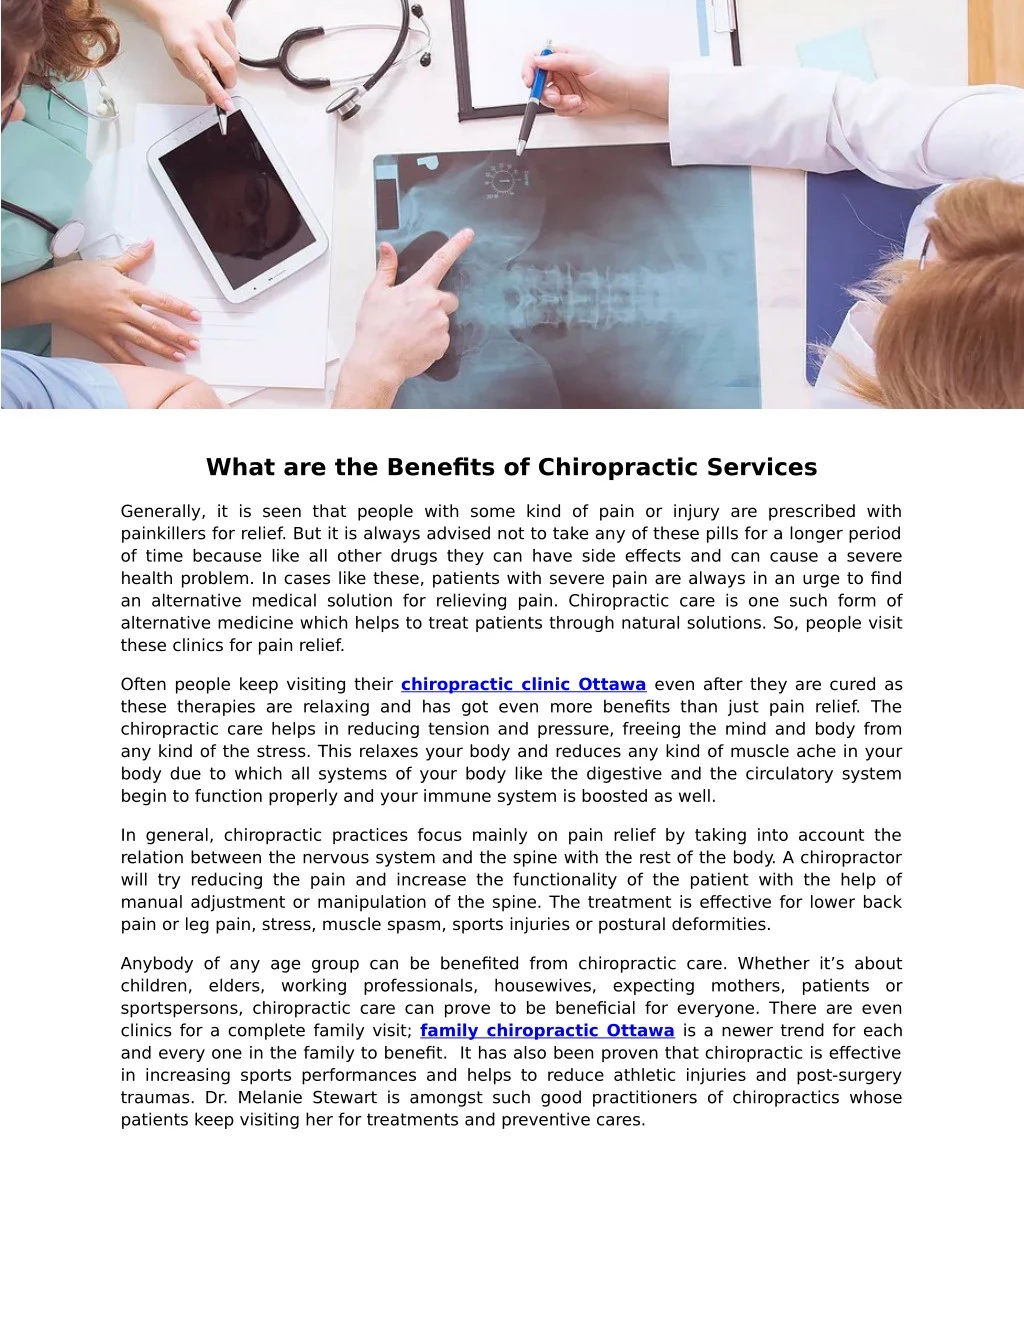 what are the benefits of chiropractic services